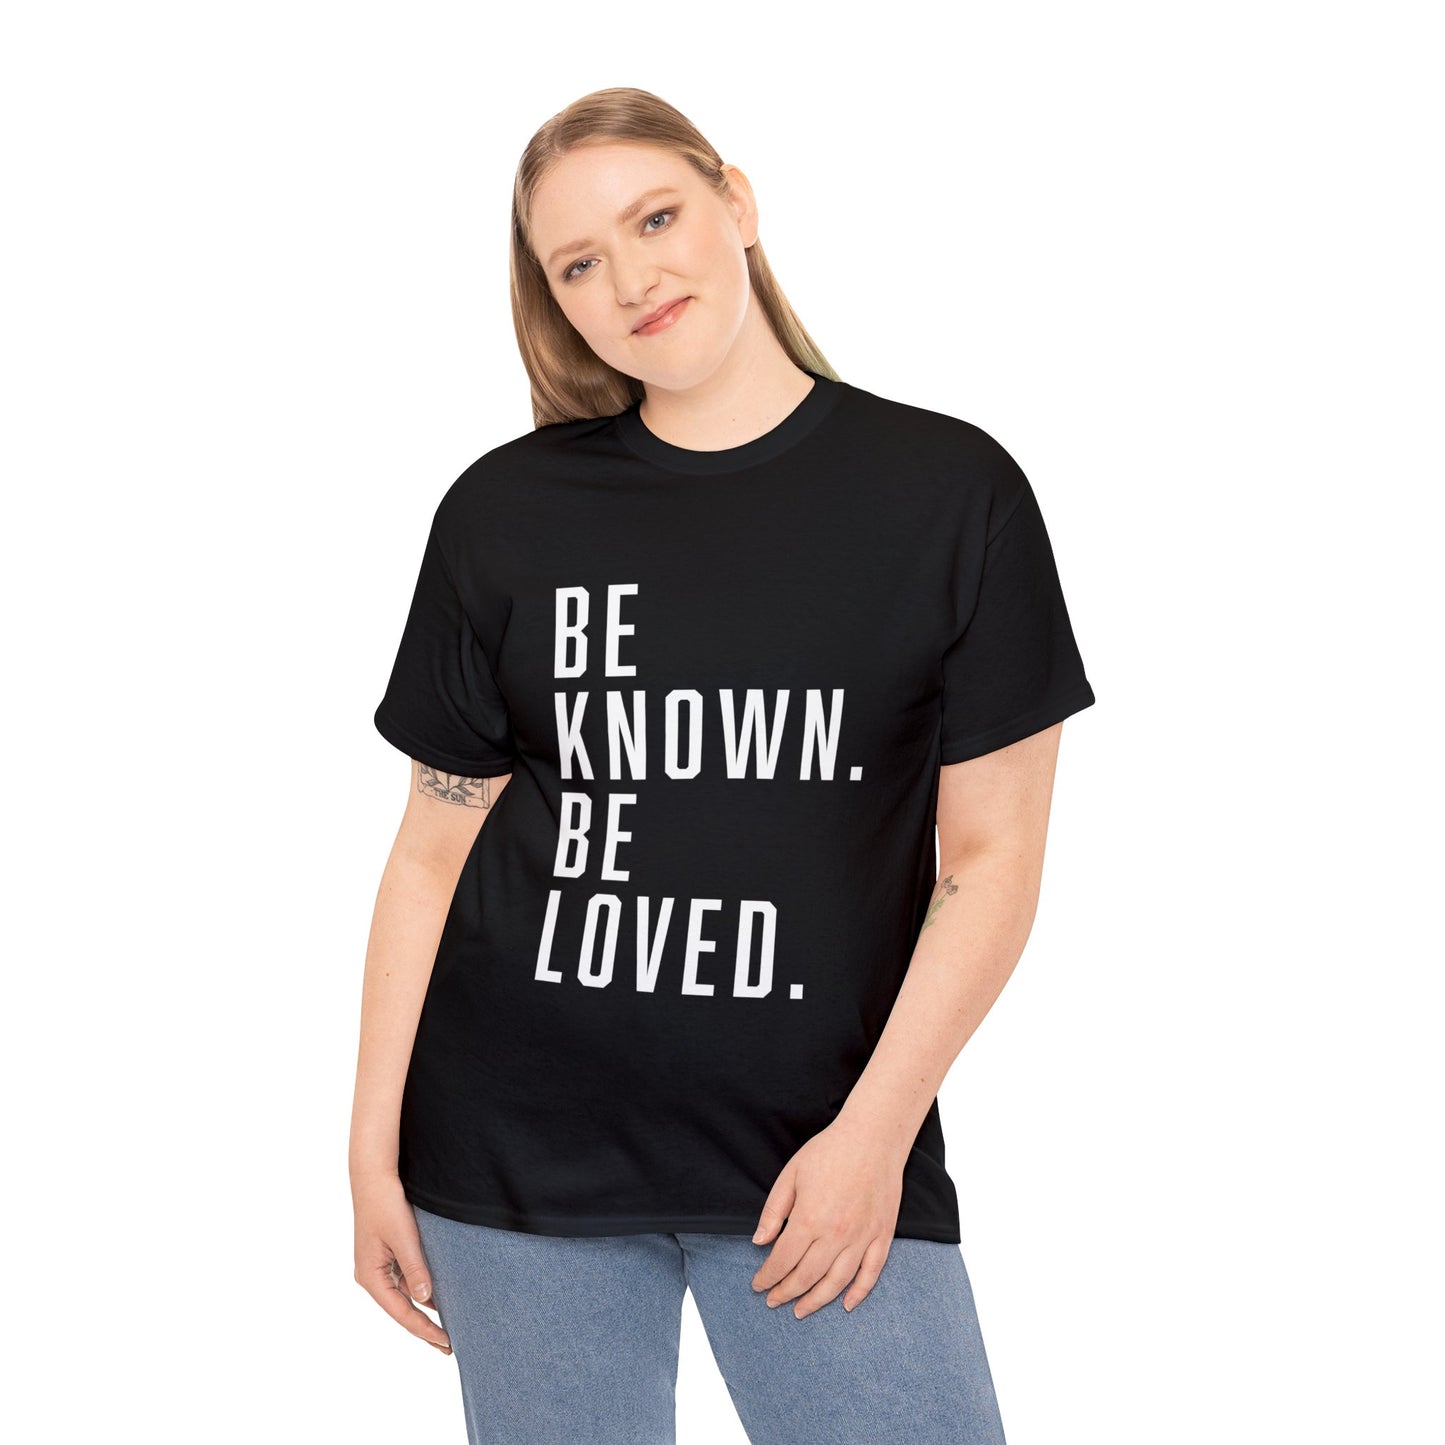 Be Known. Be Loved. Tee